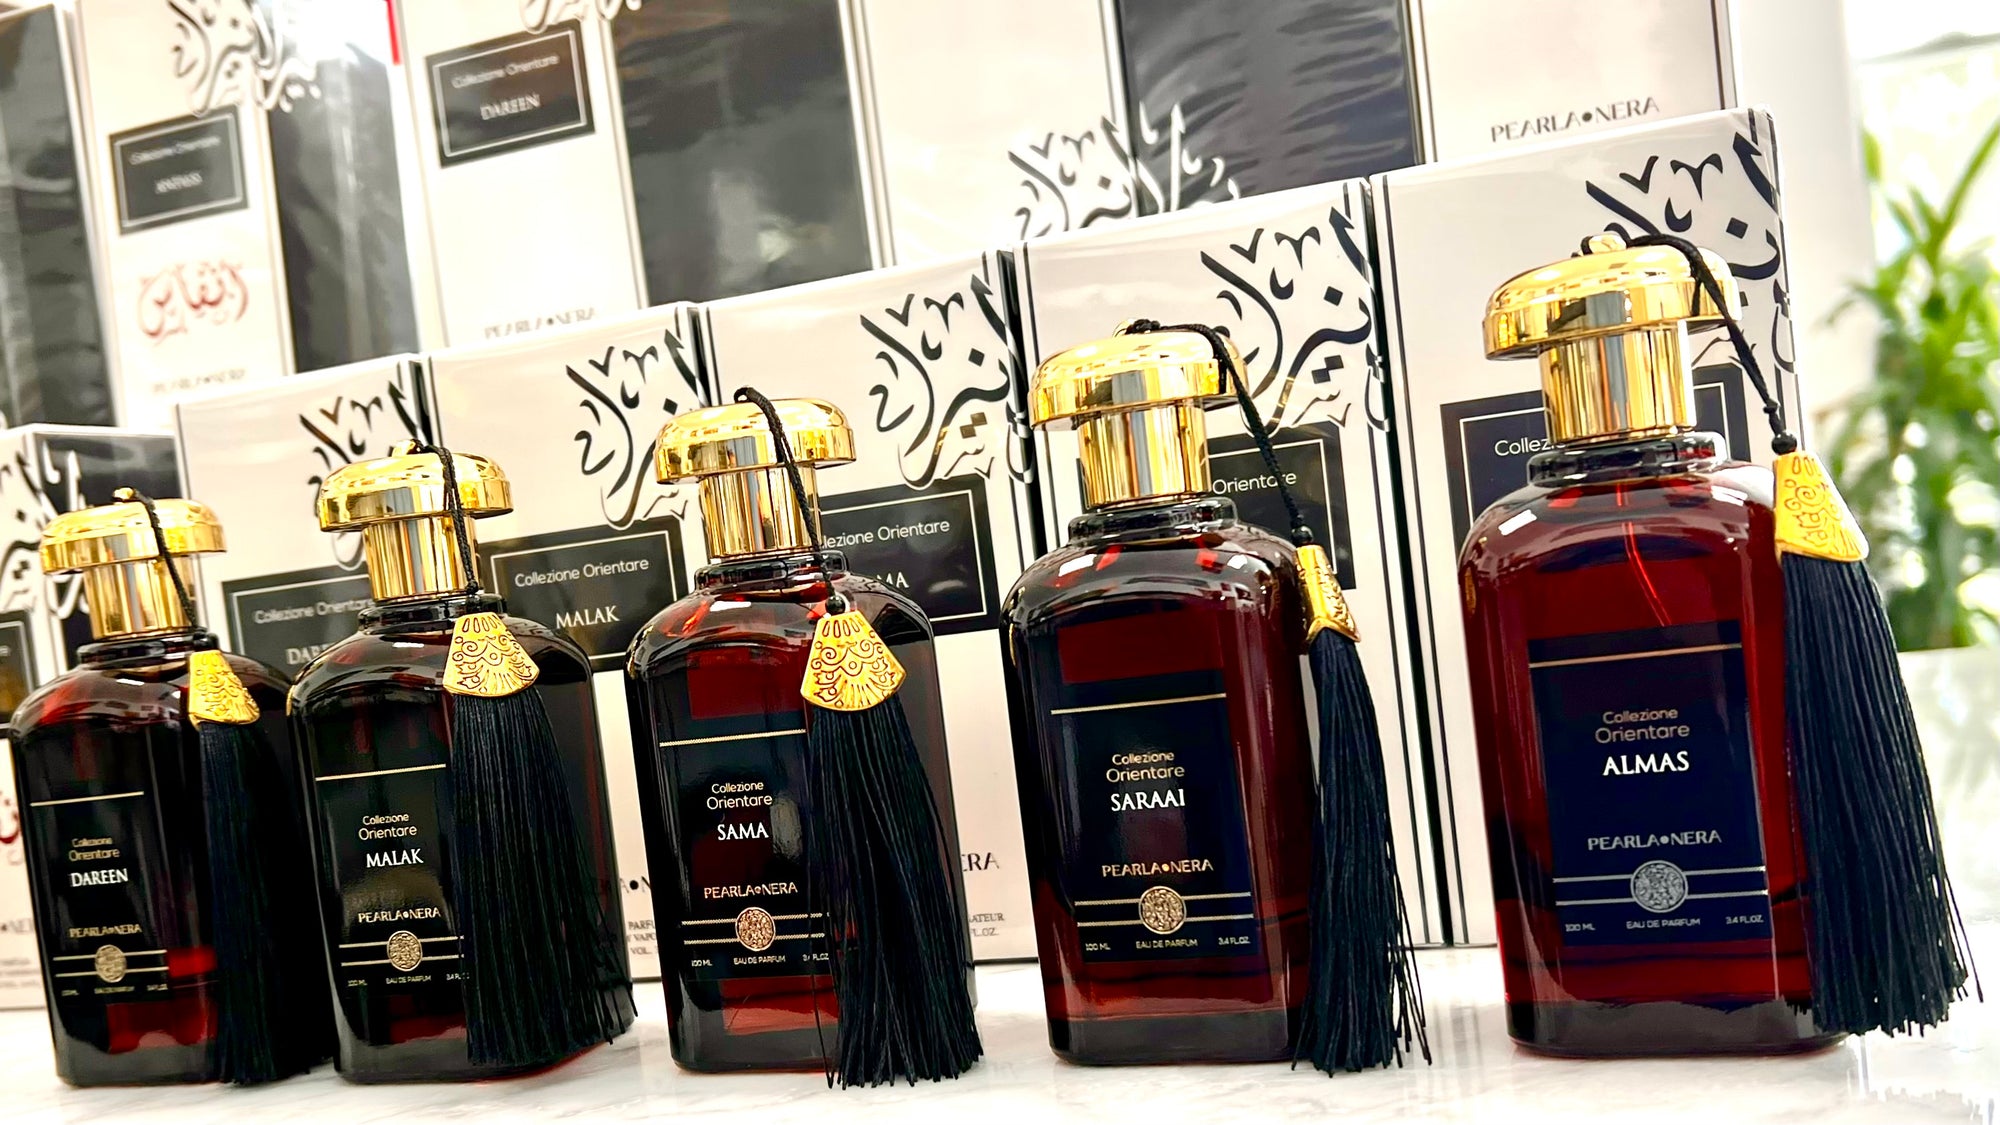 There are 20 perfumes to experience; Carefully selected to provide a guide of sorts through five olfactory landscapes